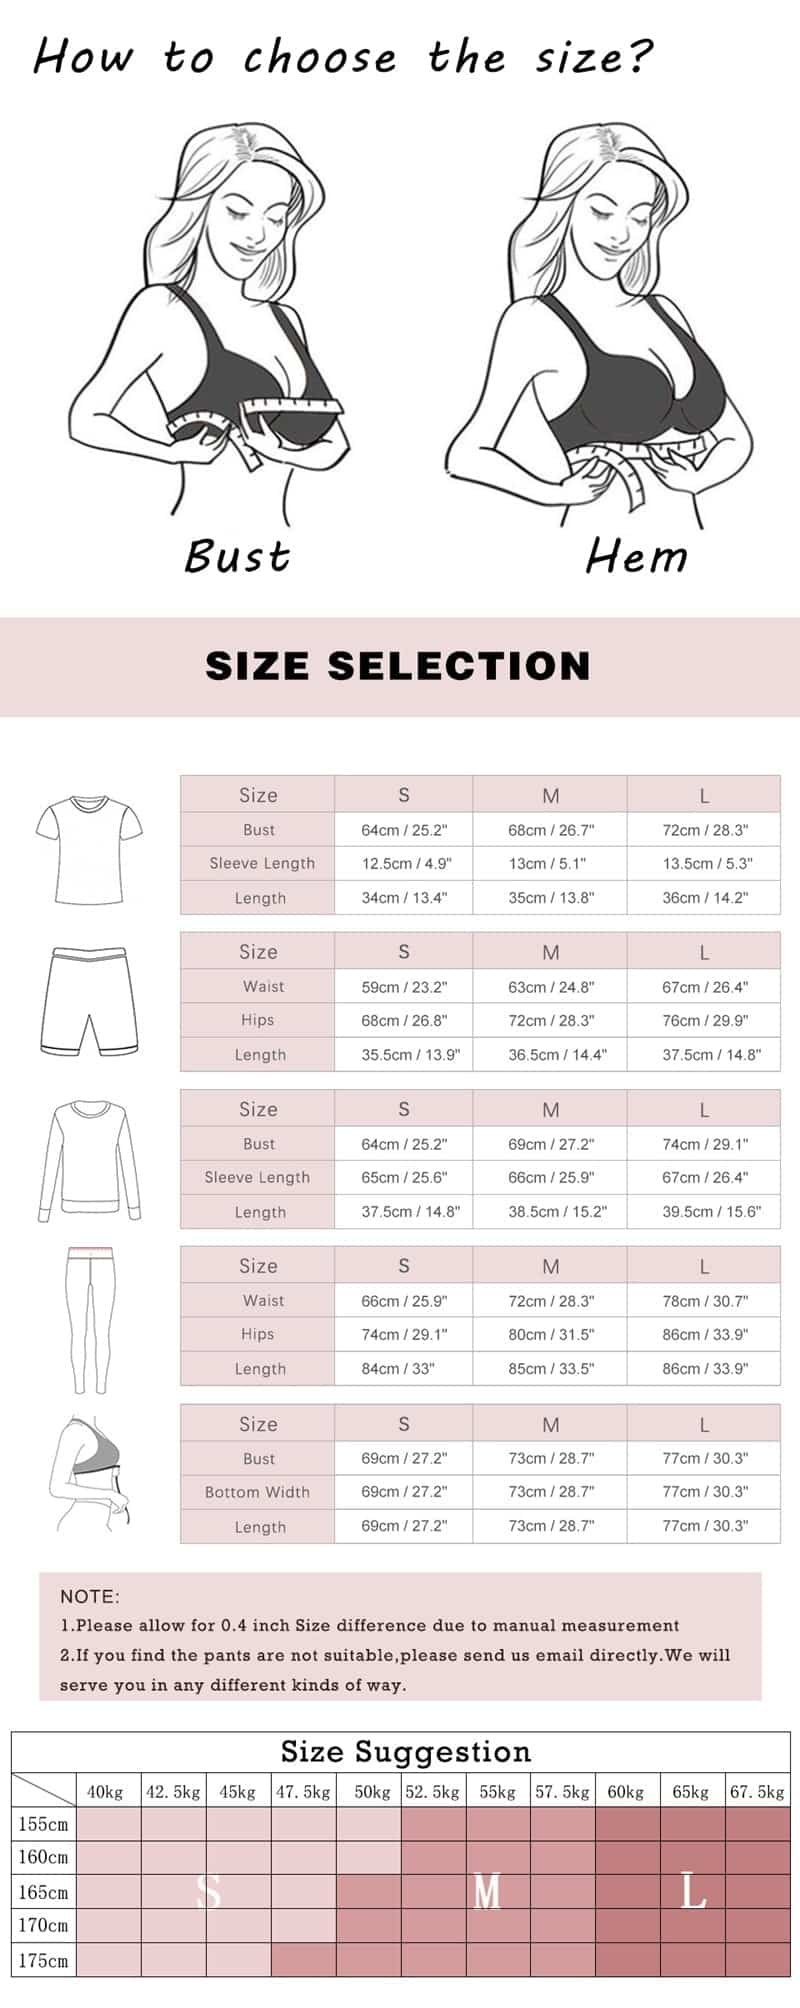 Women Tracksuit Sports Clothing Set Gym Sportswear Female Seamless Leggings Yoga Set Sport Suit For Fitness Clothes Workout Suit